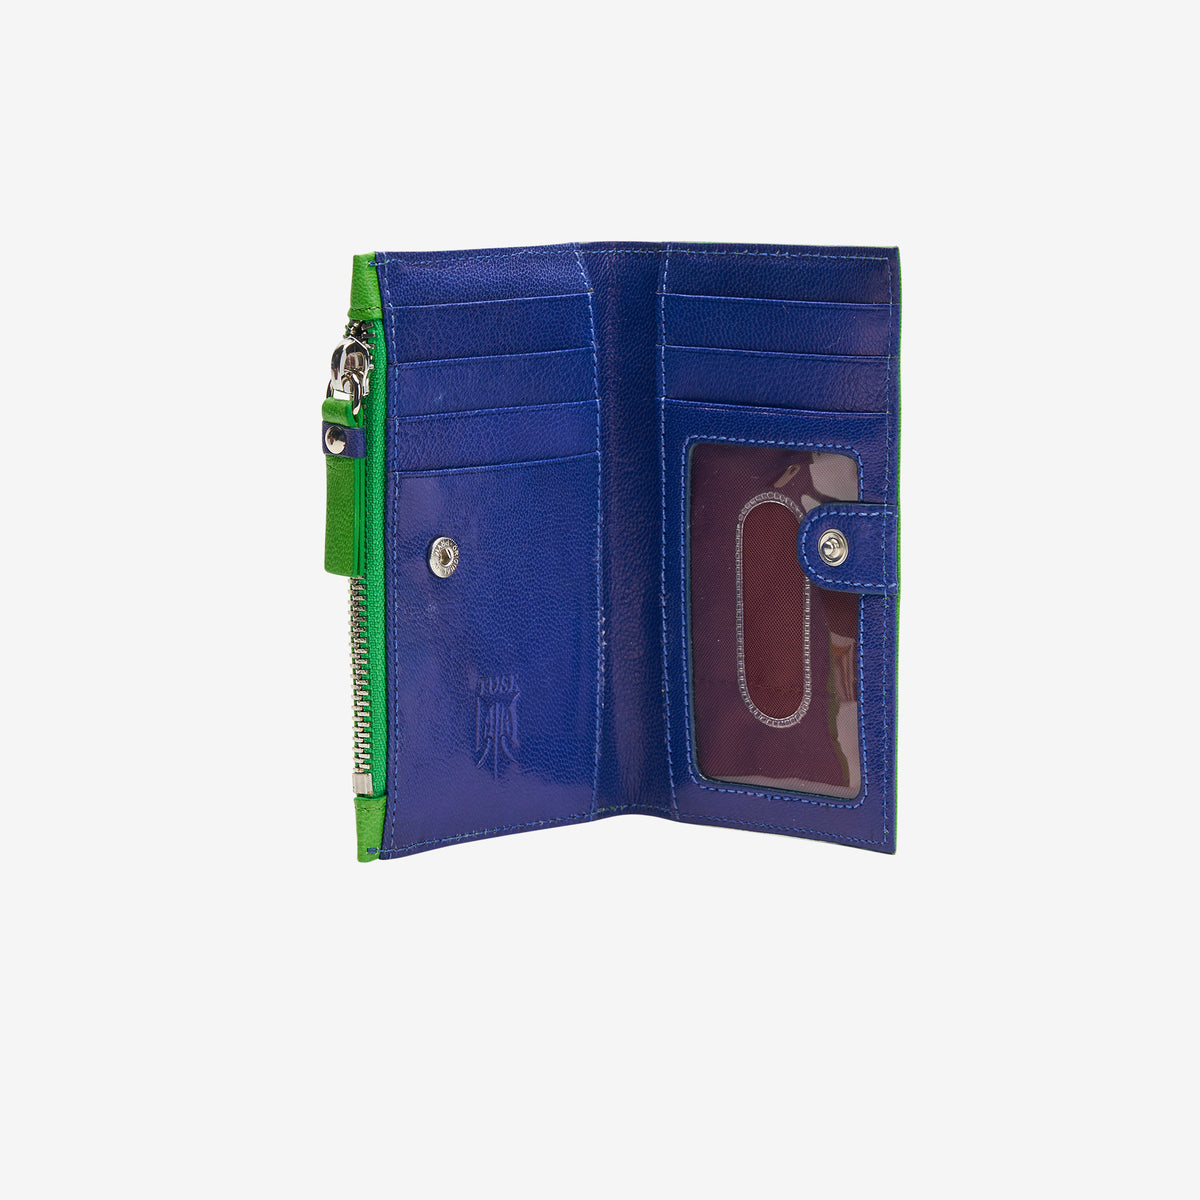     tusk-383-leather-slim-card-case-with-zip-coin-pocket-grass-and-indigo-open